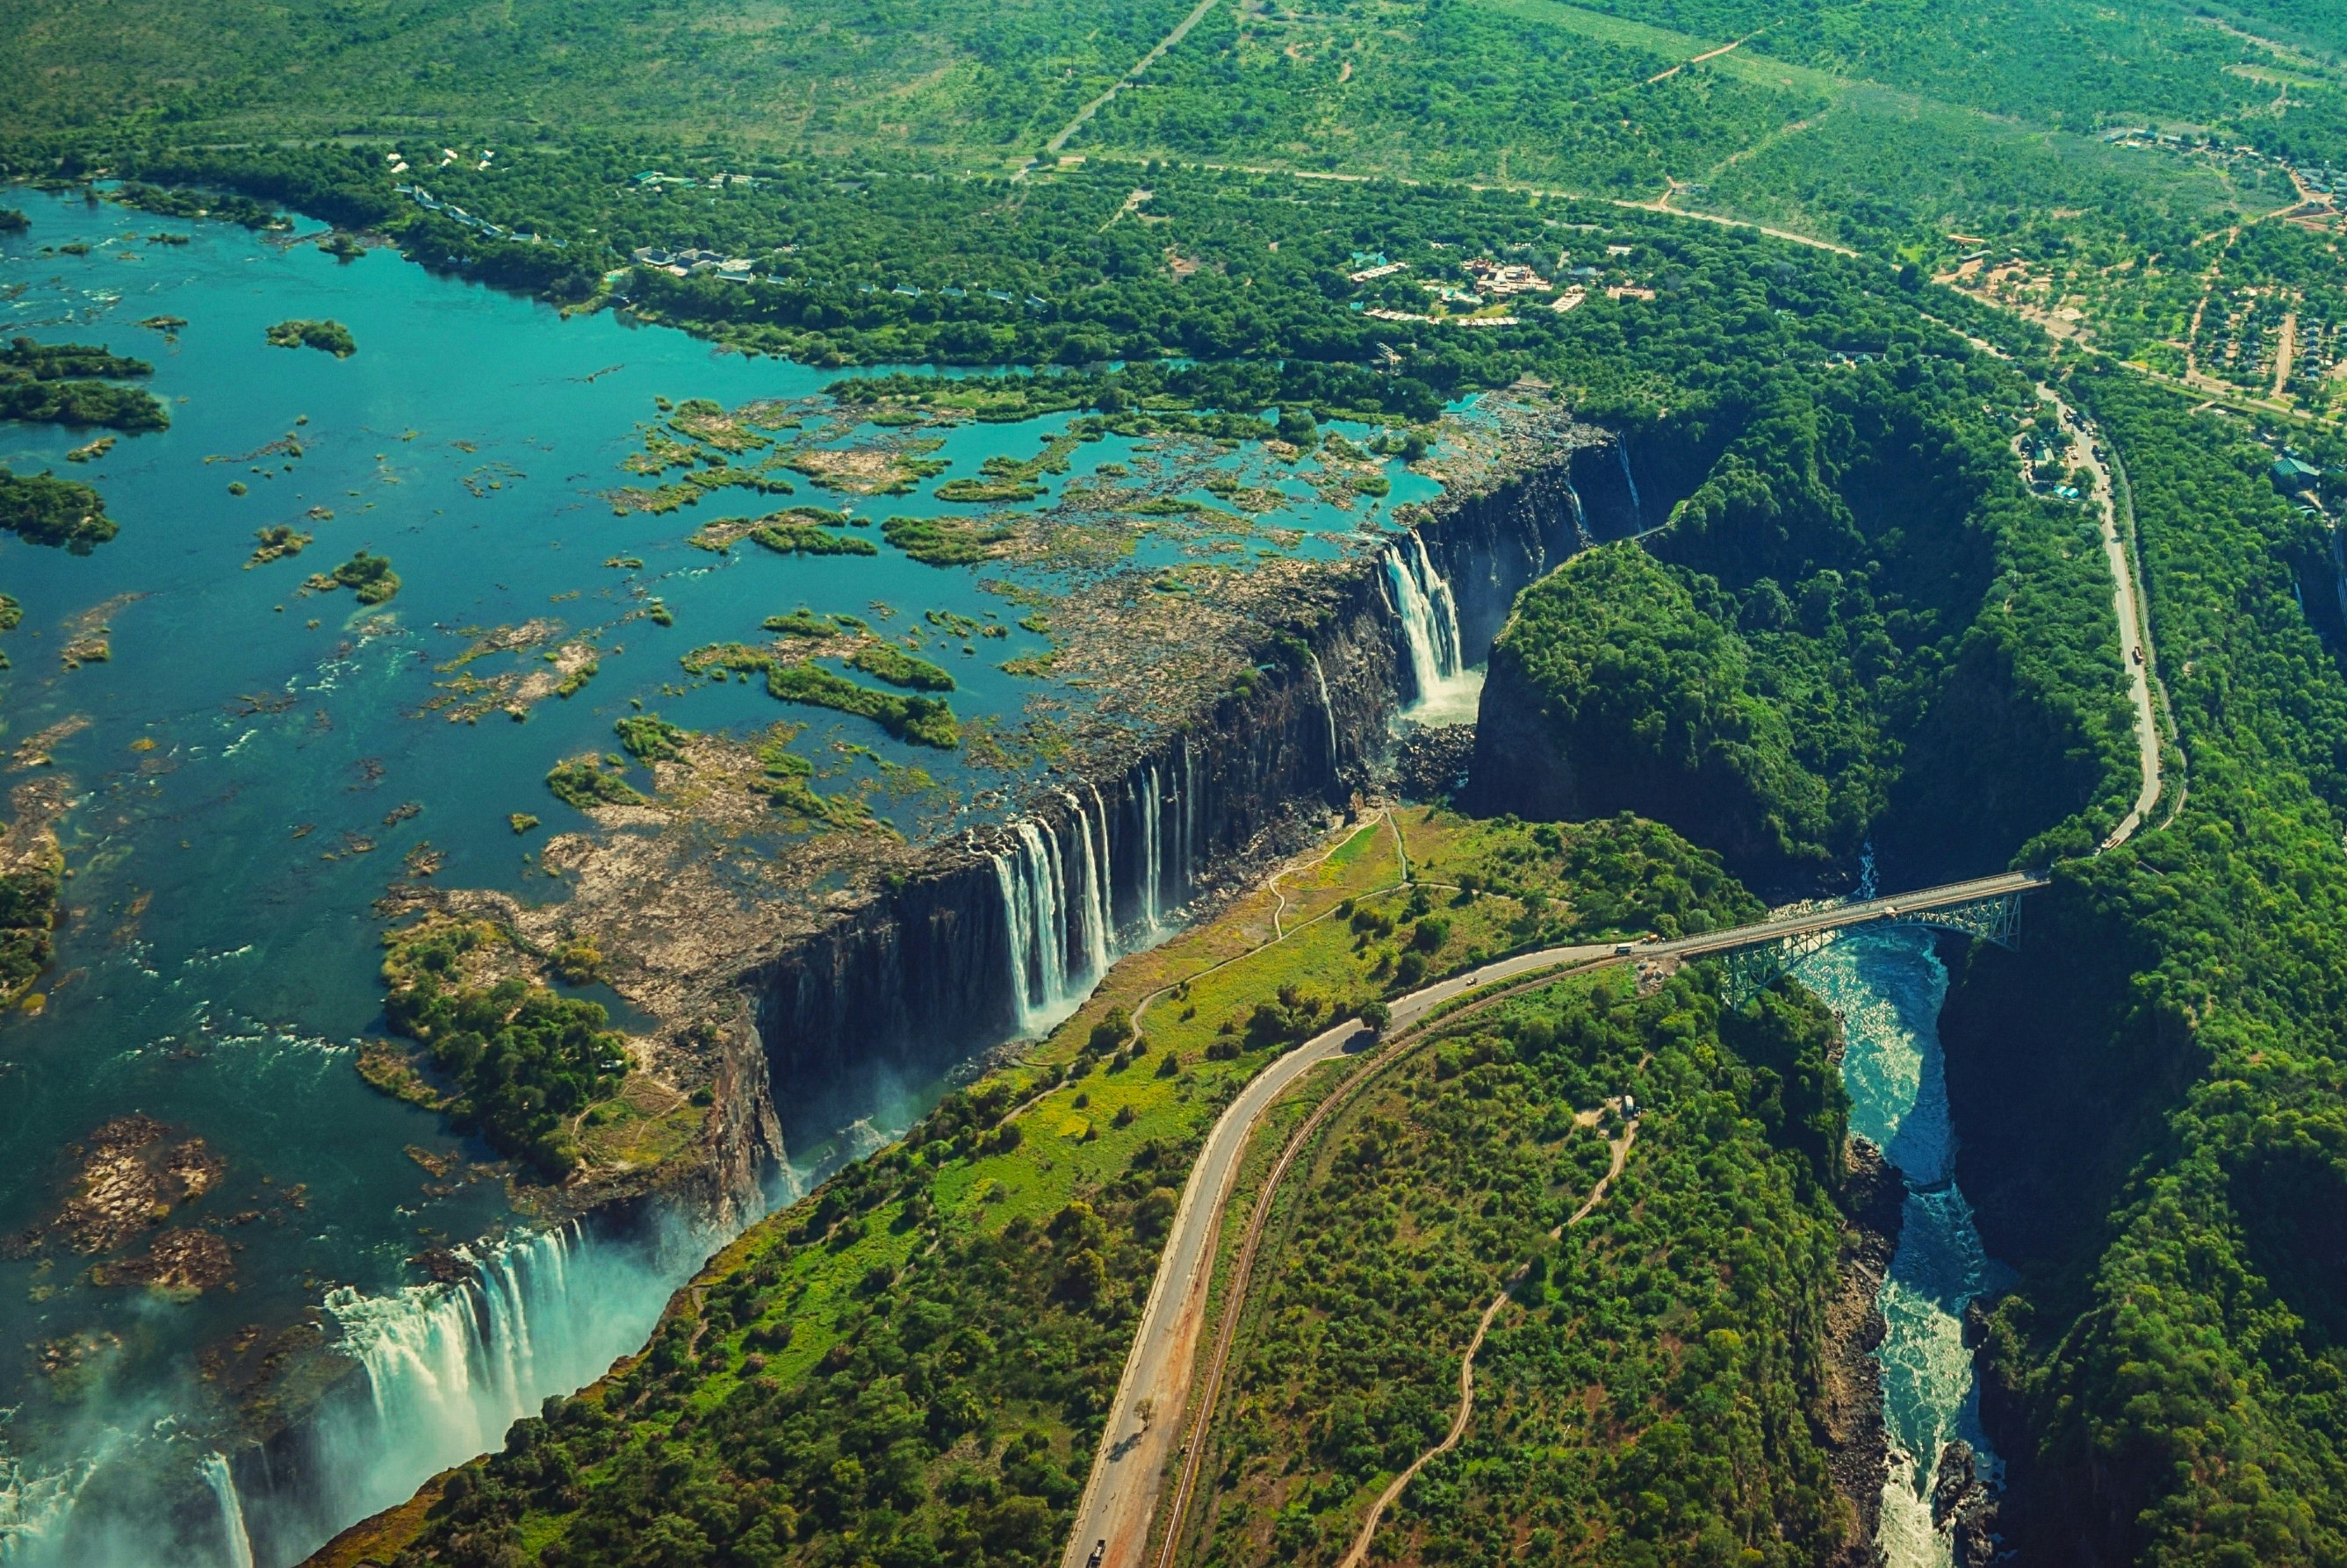 An aerial shot shows lush green and turquoise vegetation around the wide mouth of the Zambezi River where it spills over Victoria falls and winds through a basalt gorge